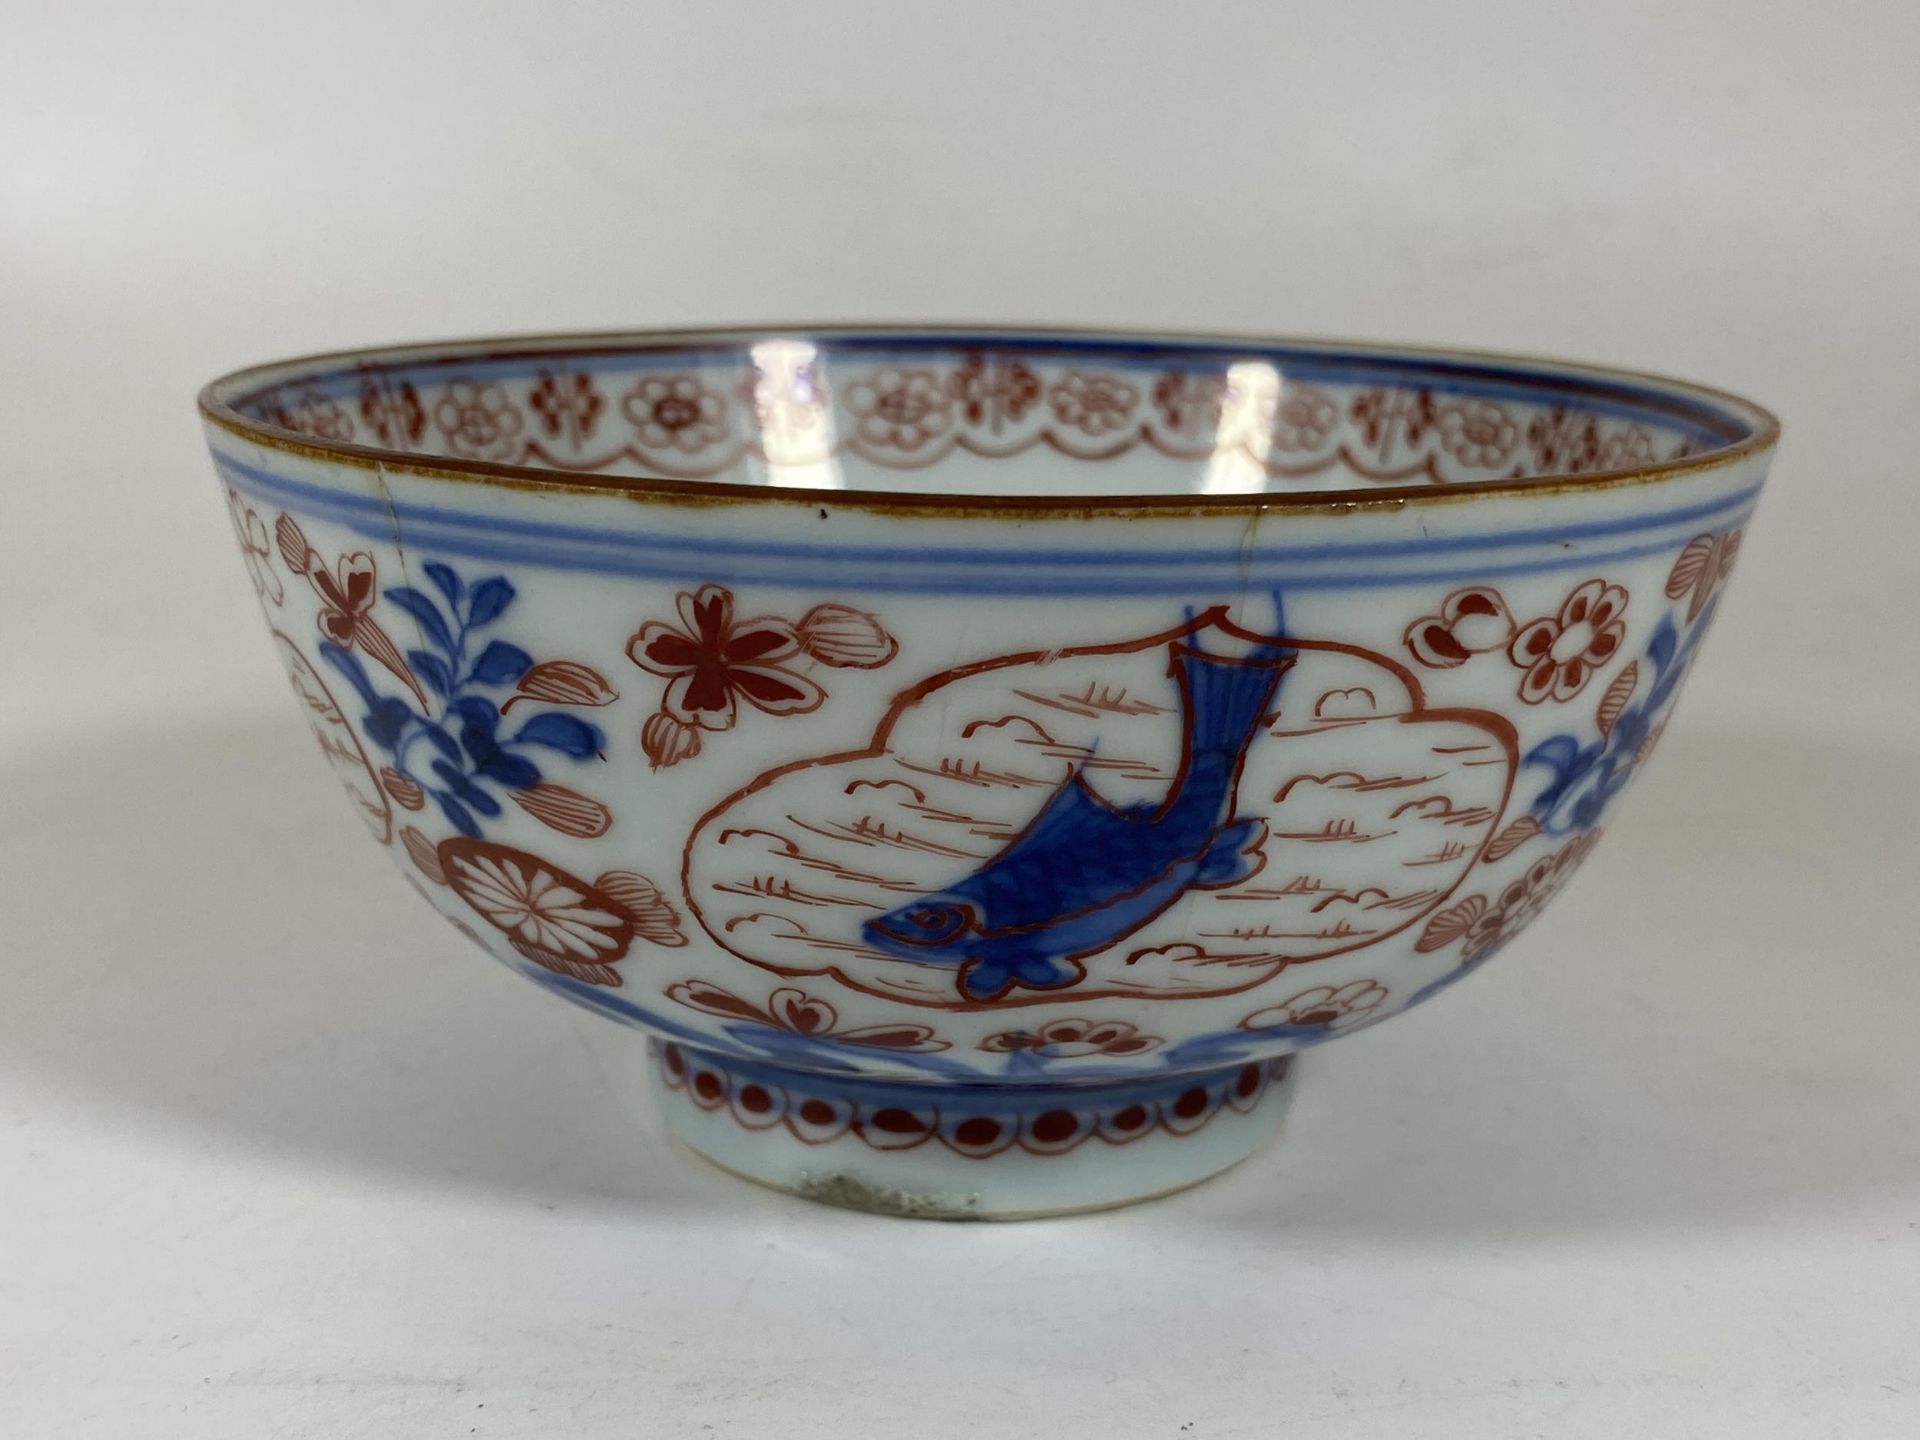 A 19TH CENTURY CHINESE PORCELAIN FISH DESIGN BOWL, MARK TO BASE, DIAMETER 13CM - Image 2 of 6